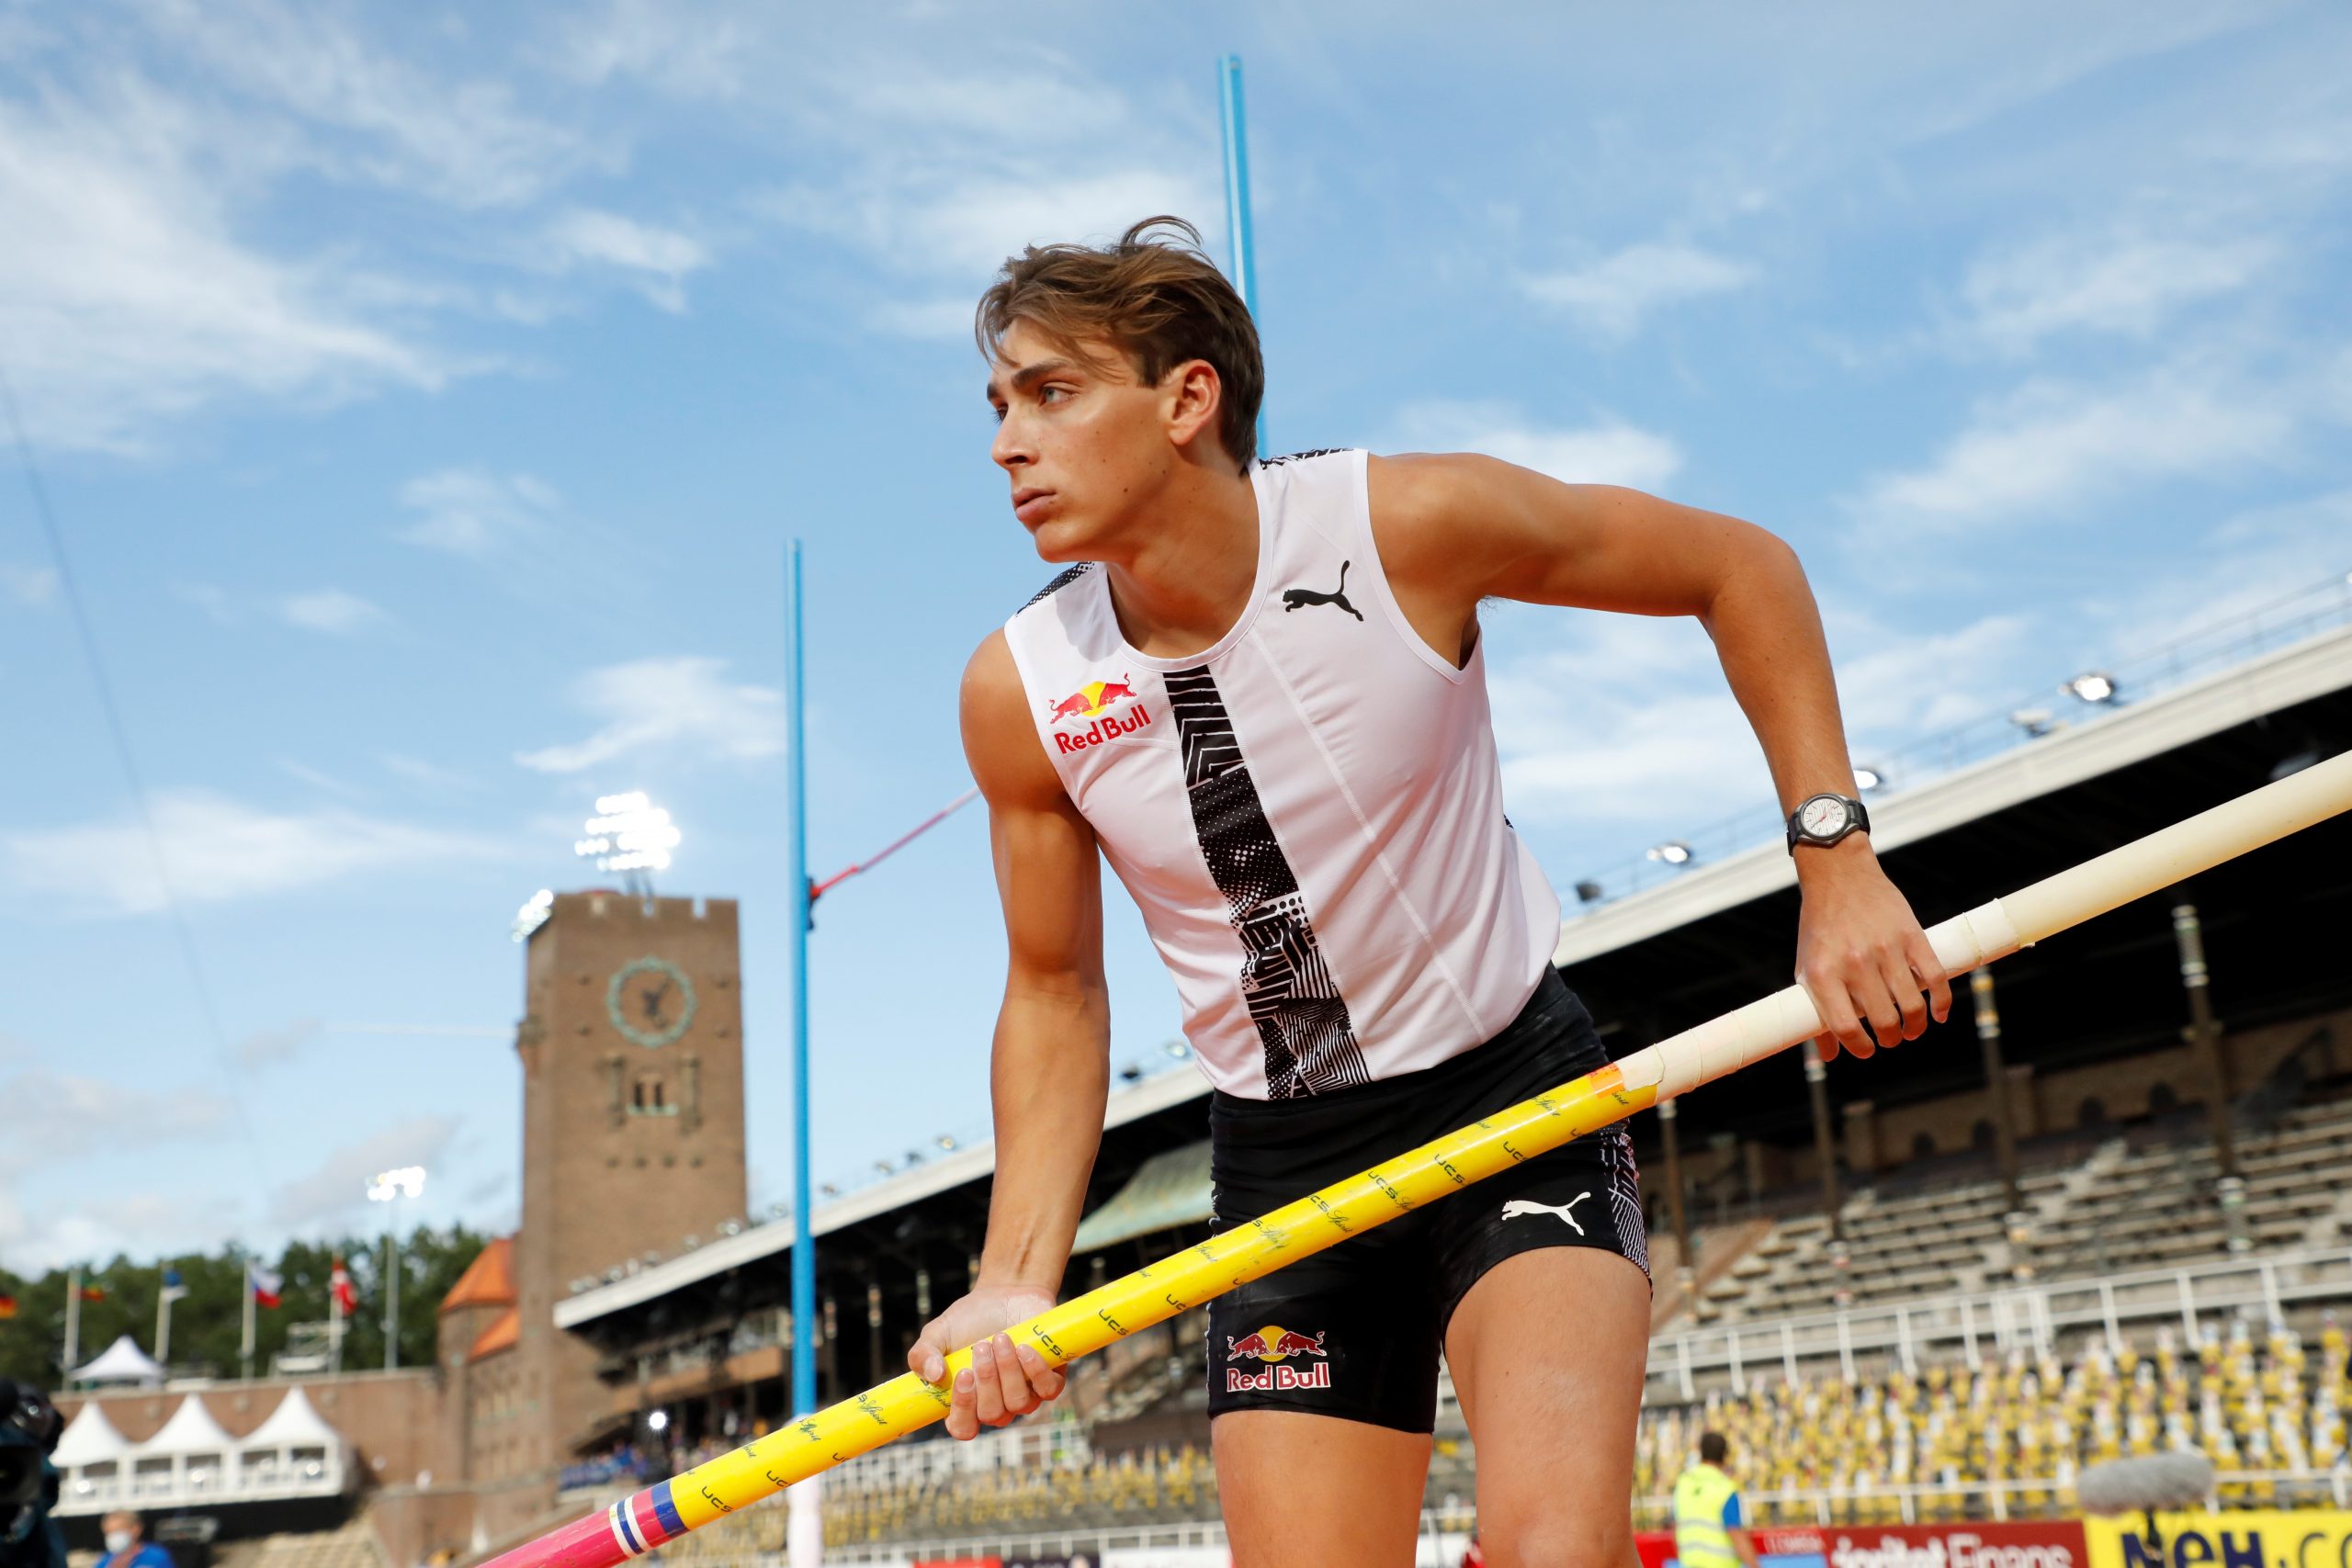 epa08619933 Armand Duplantis, Sweden, during the men's pole vault during the Stockholm Diamond League competition at the Stockholm Stadium, Sweden, 23 August 2020.  EPA/Christine Olsson  SWEDEN OUT